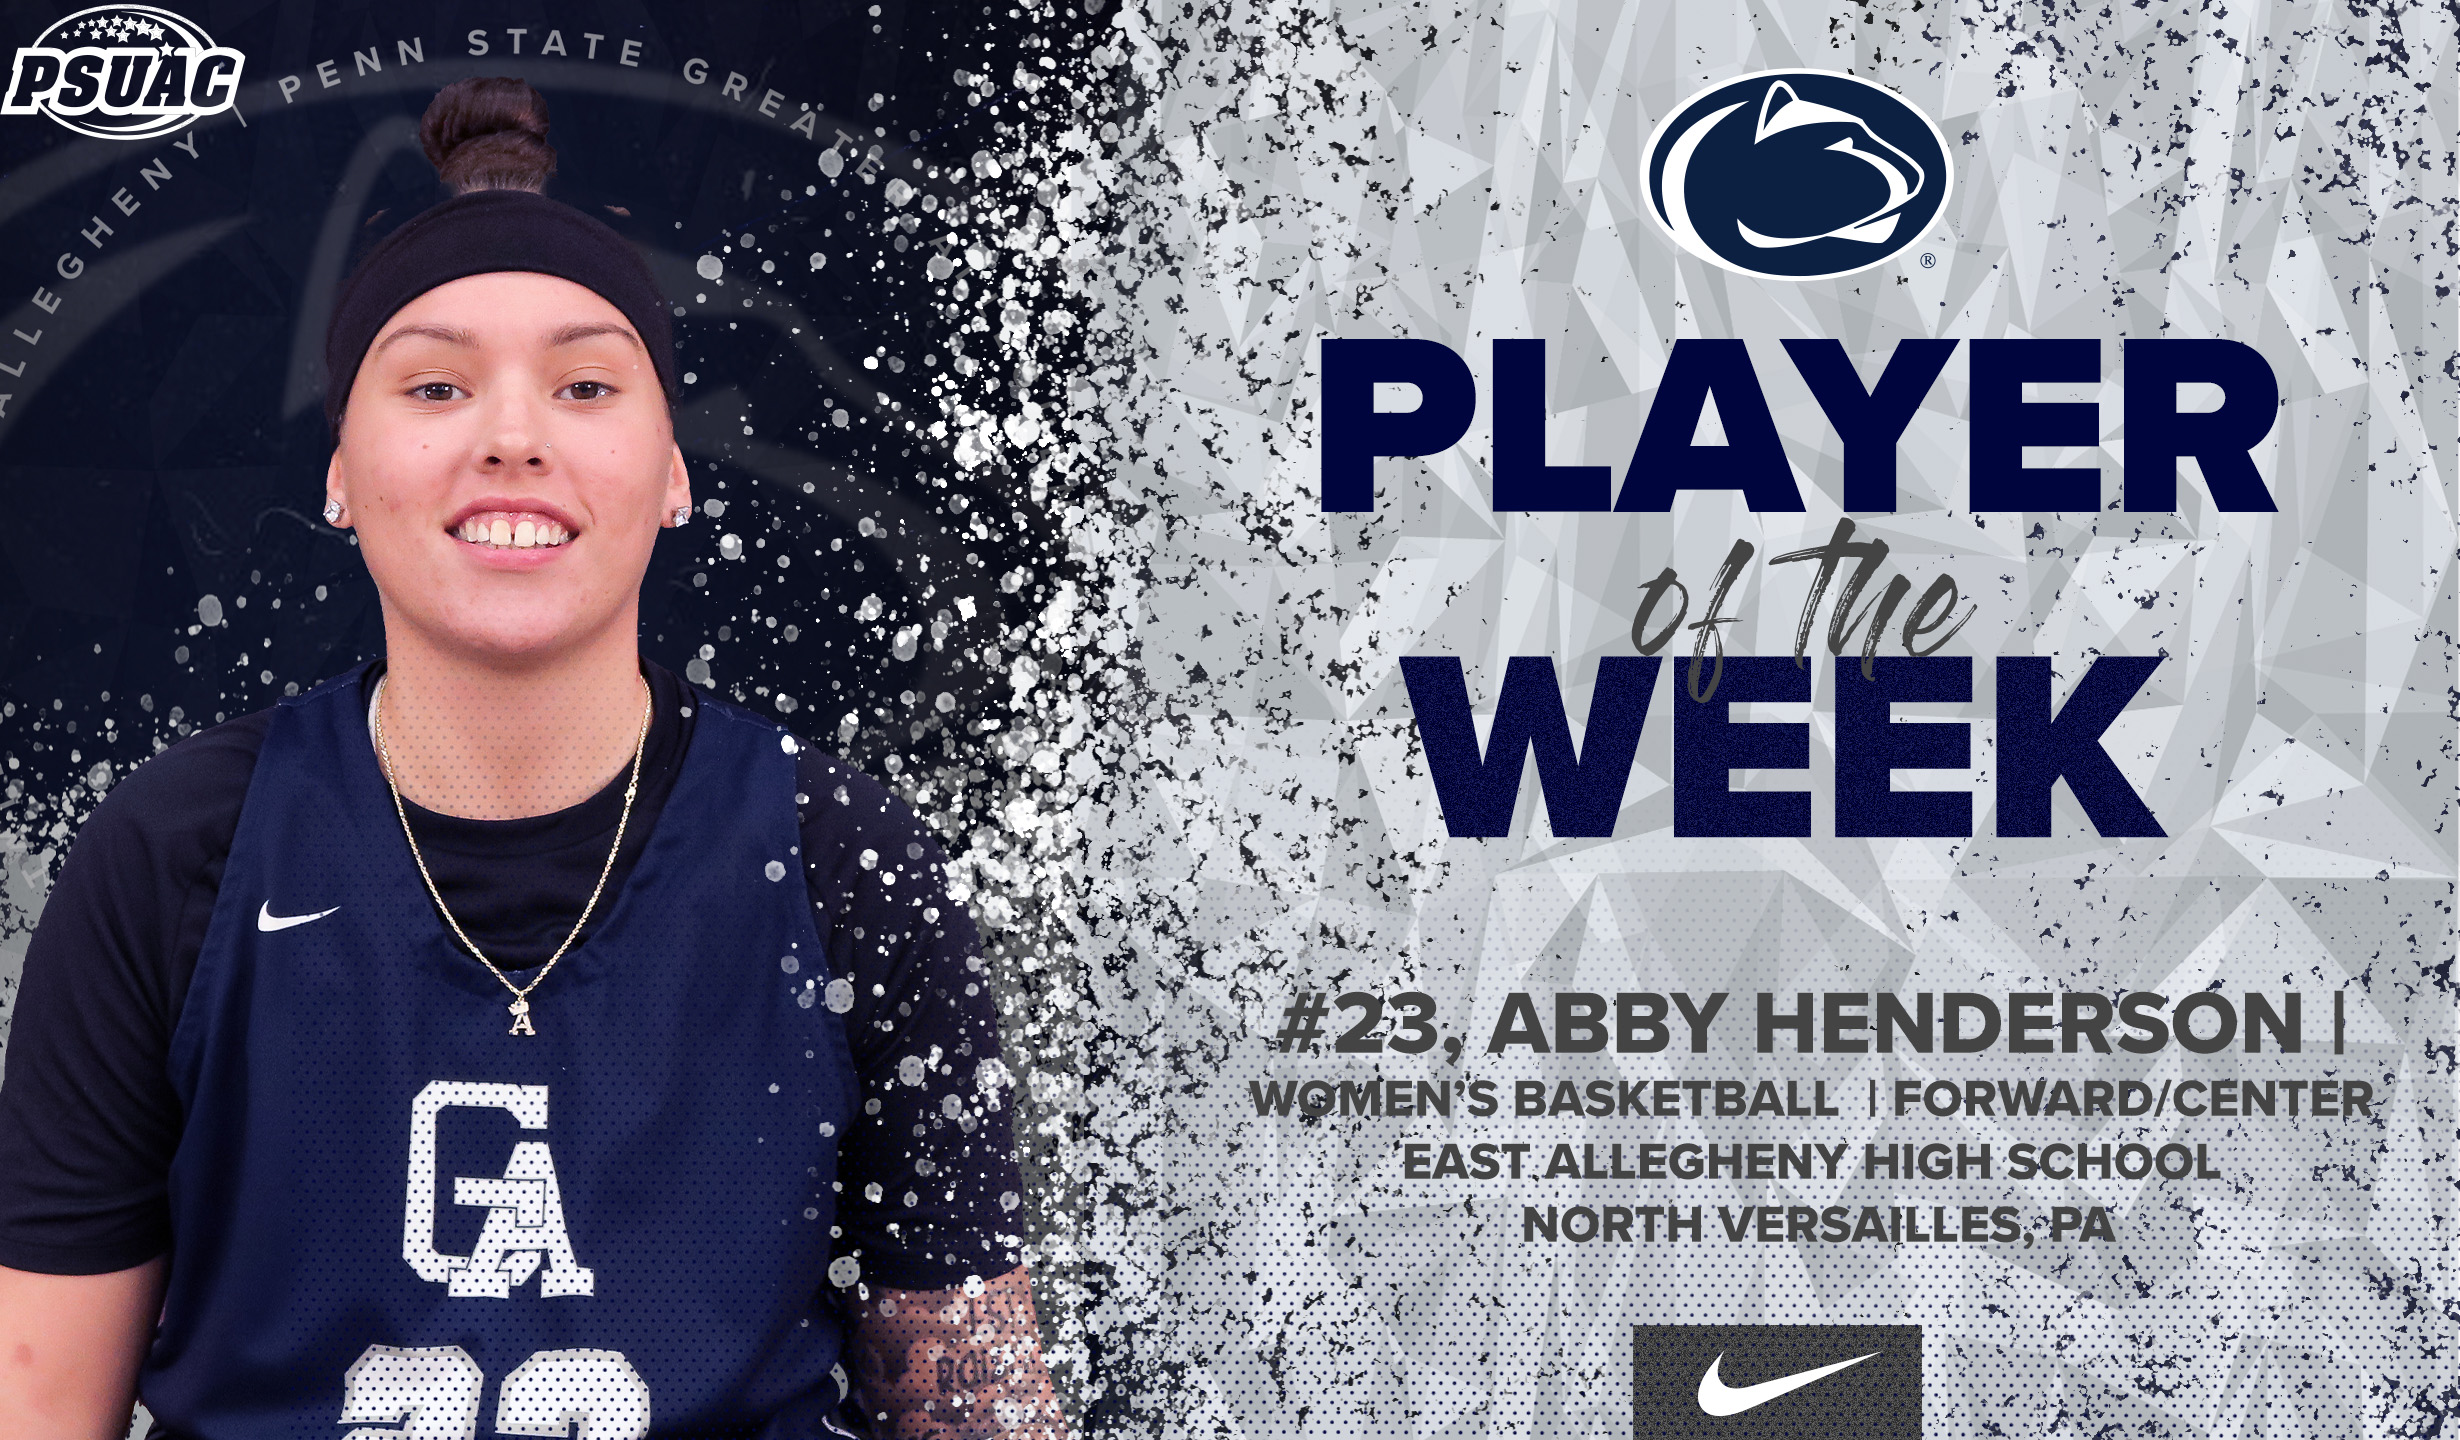 Henderson's Big Week Leads to Women's PSUAC Player of the Week